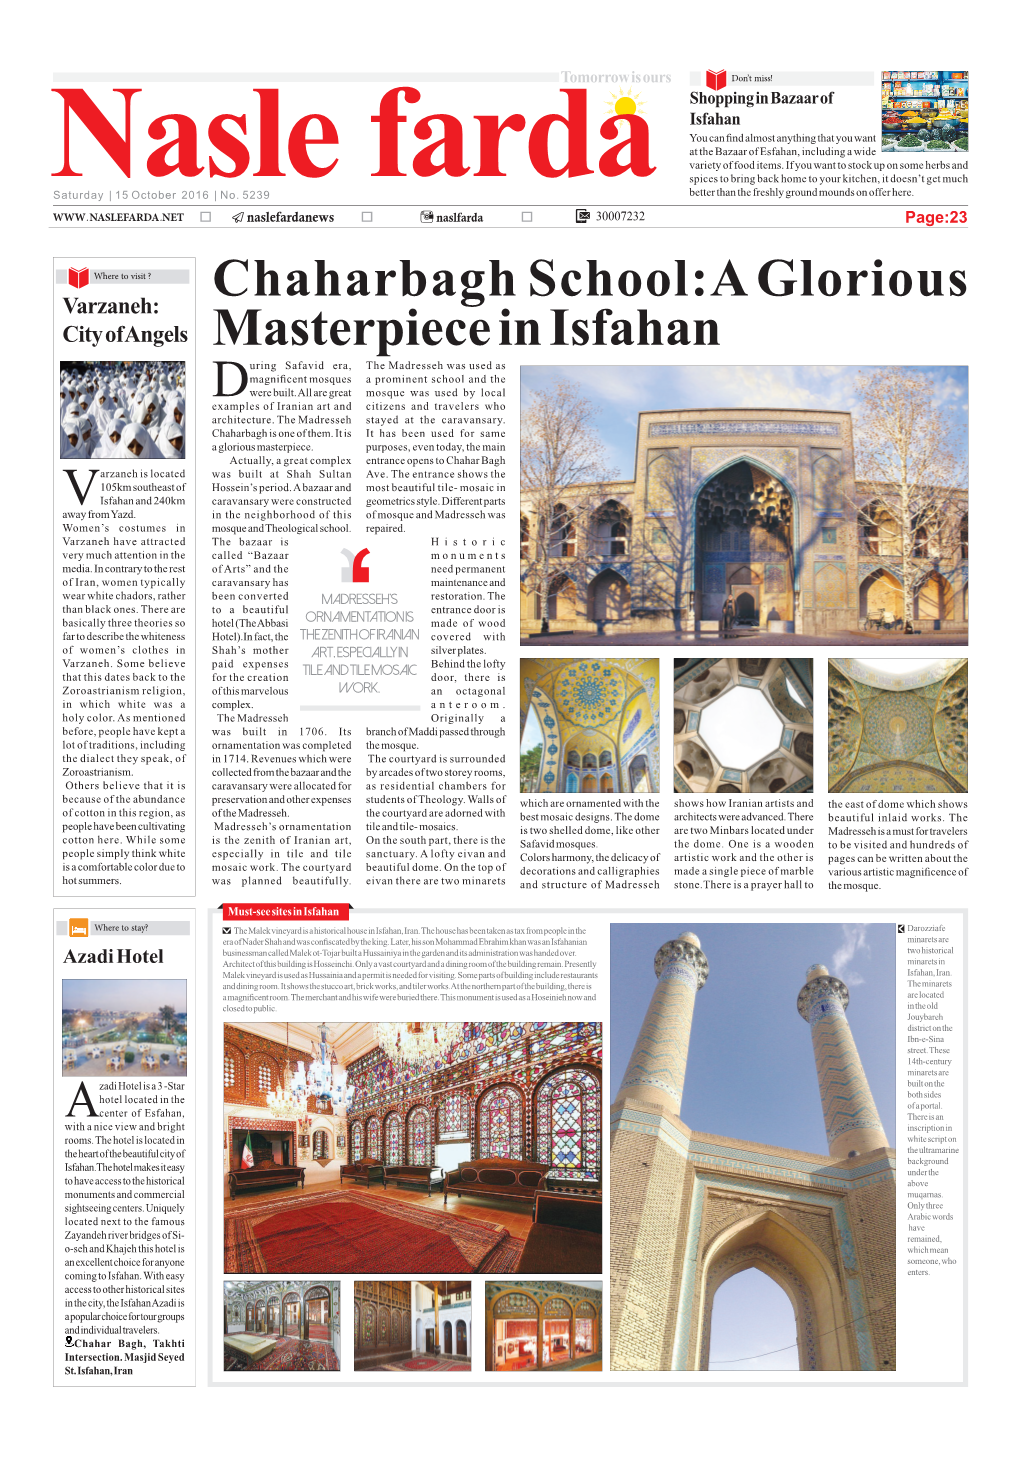 Chaharbagh School:A Glorious Masterpiece in Isfahan